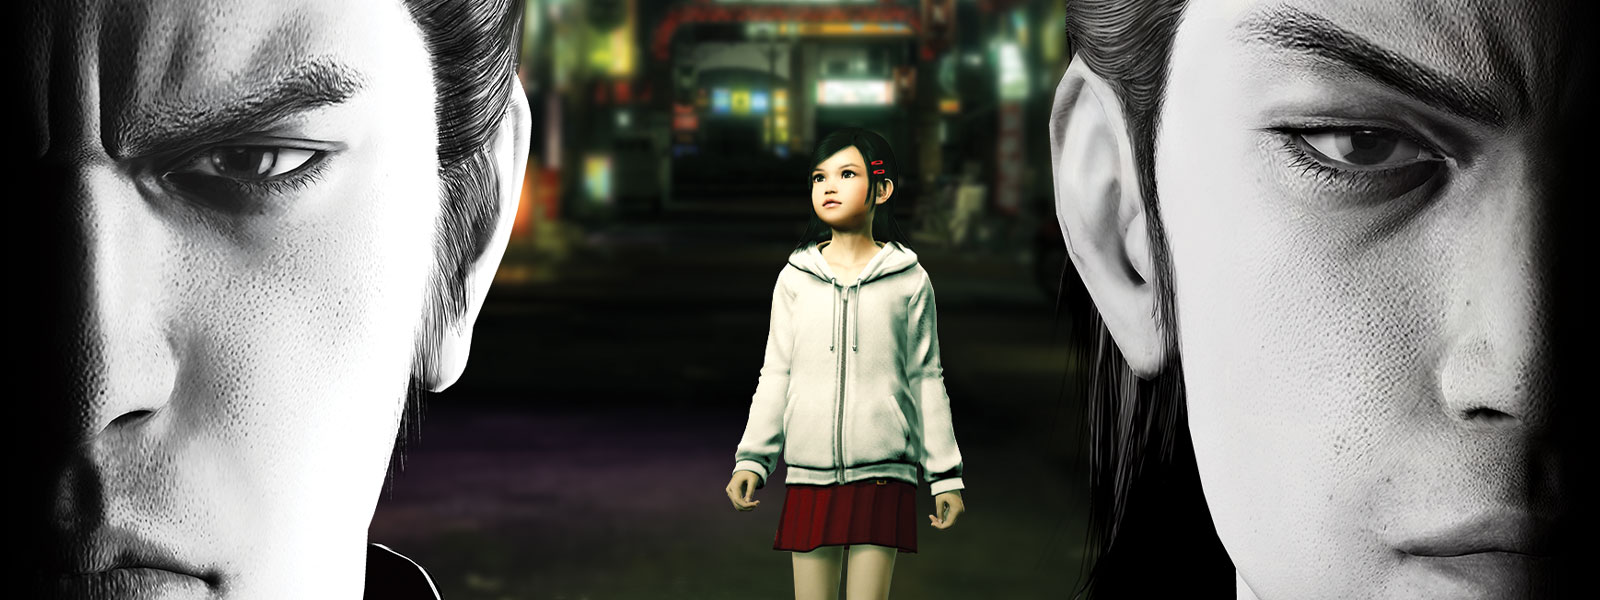 Two Yakuza characters stare somberly ahead, while a little girl stands in the city behind them.